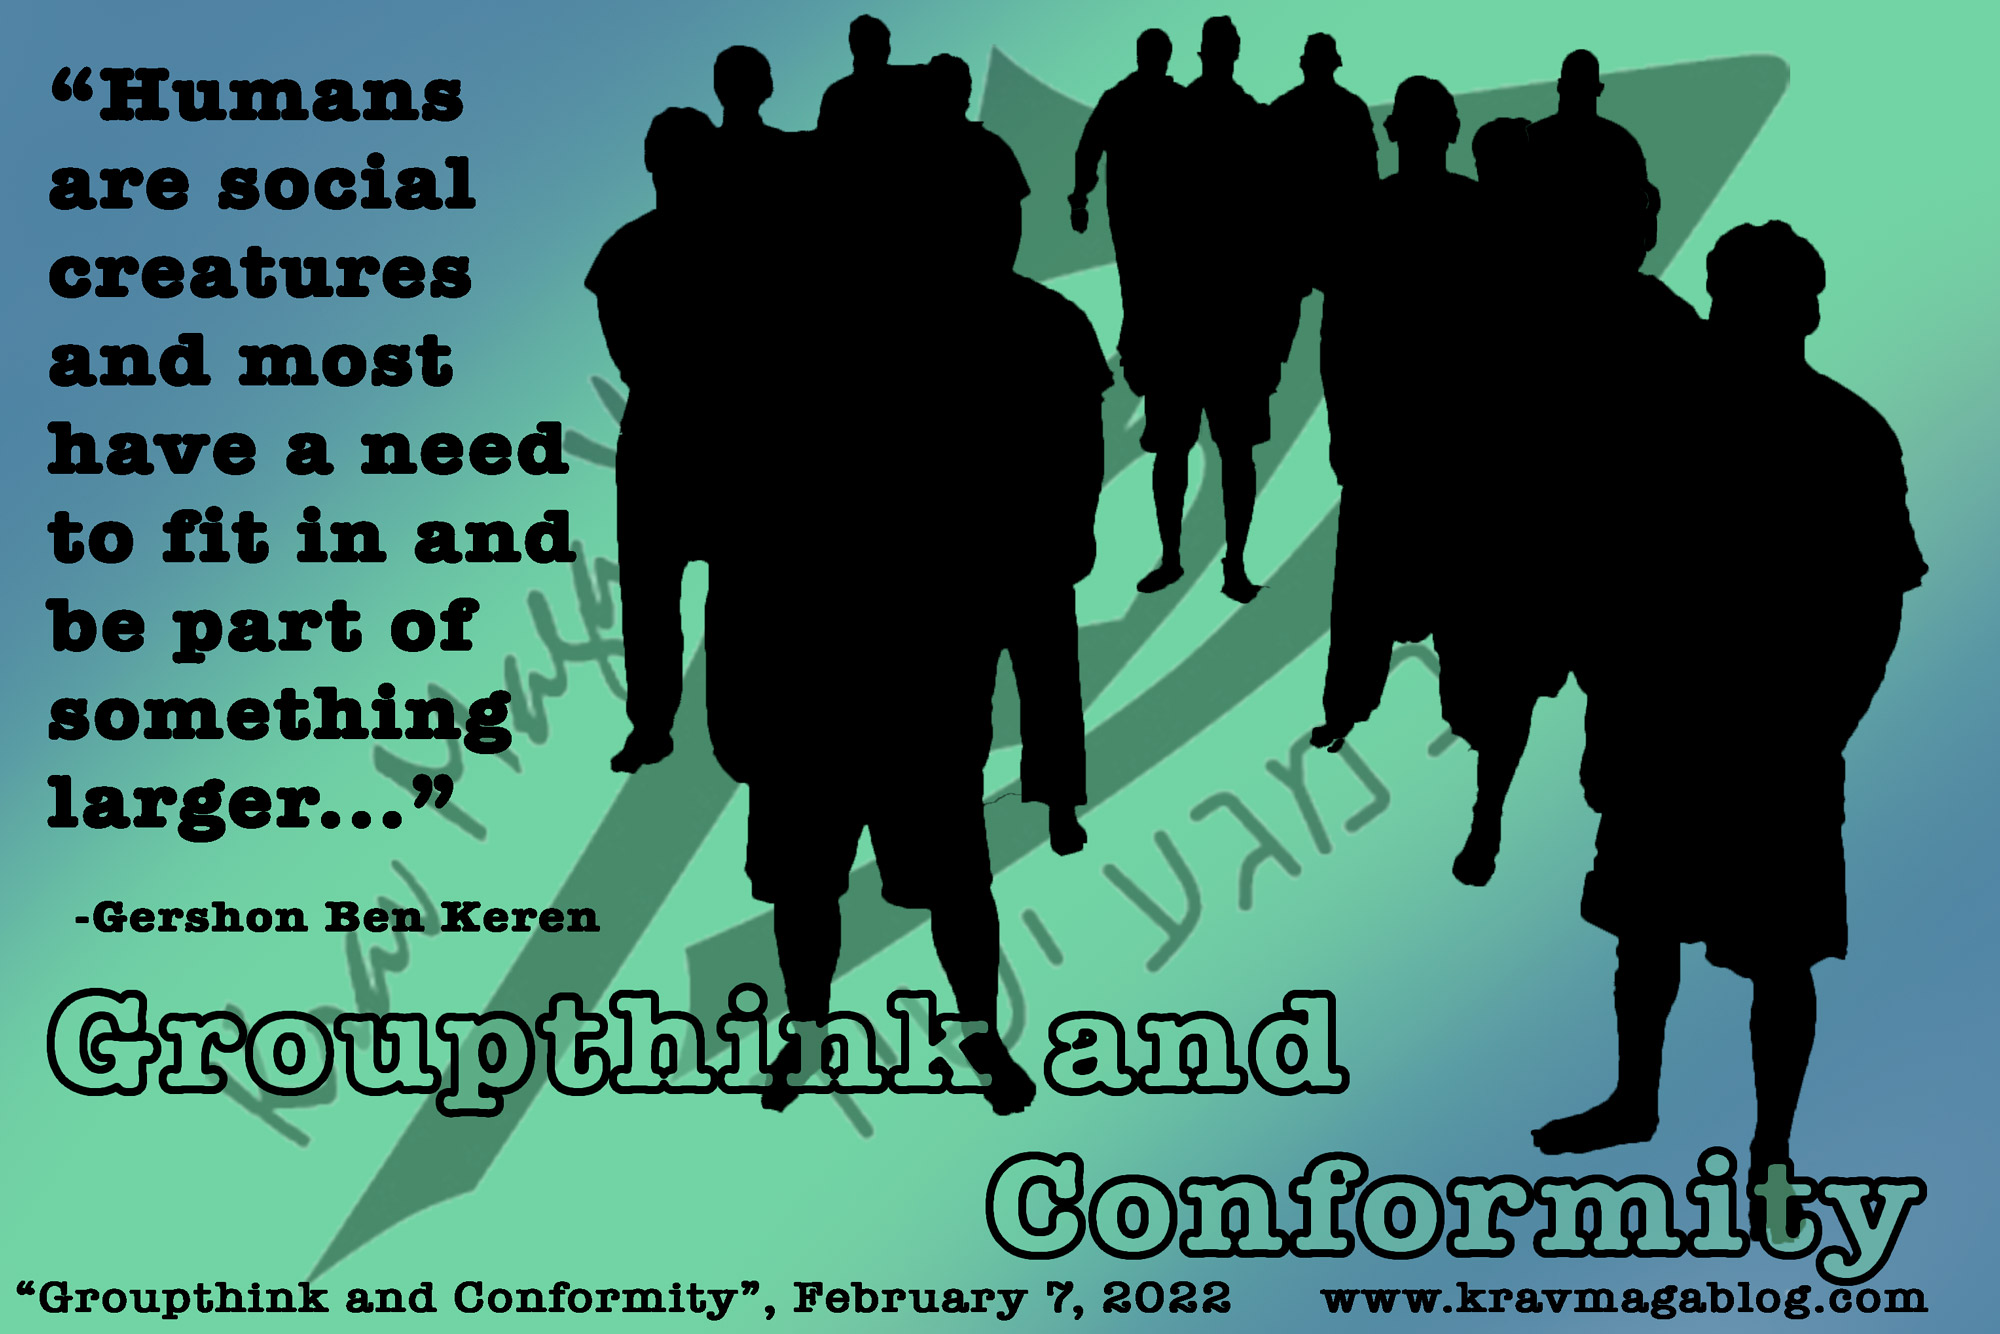 Blog About Groupthink And Conformity